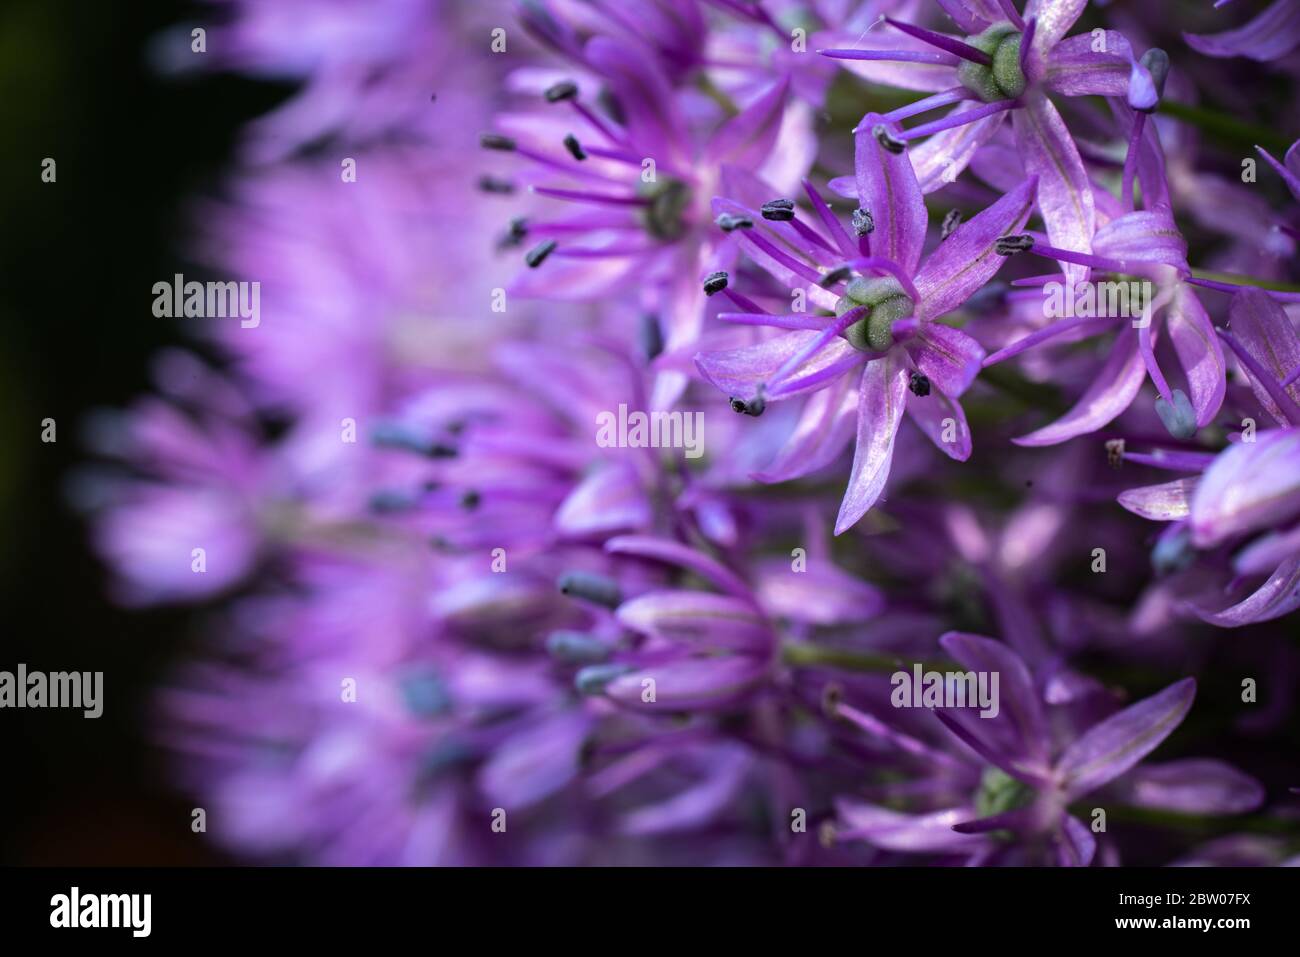 Close-up along of a flower umbel of a ornamental onion in bloom against the green background. Stock Photo